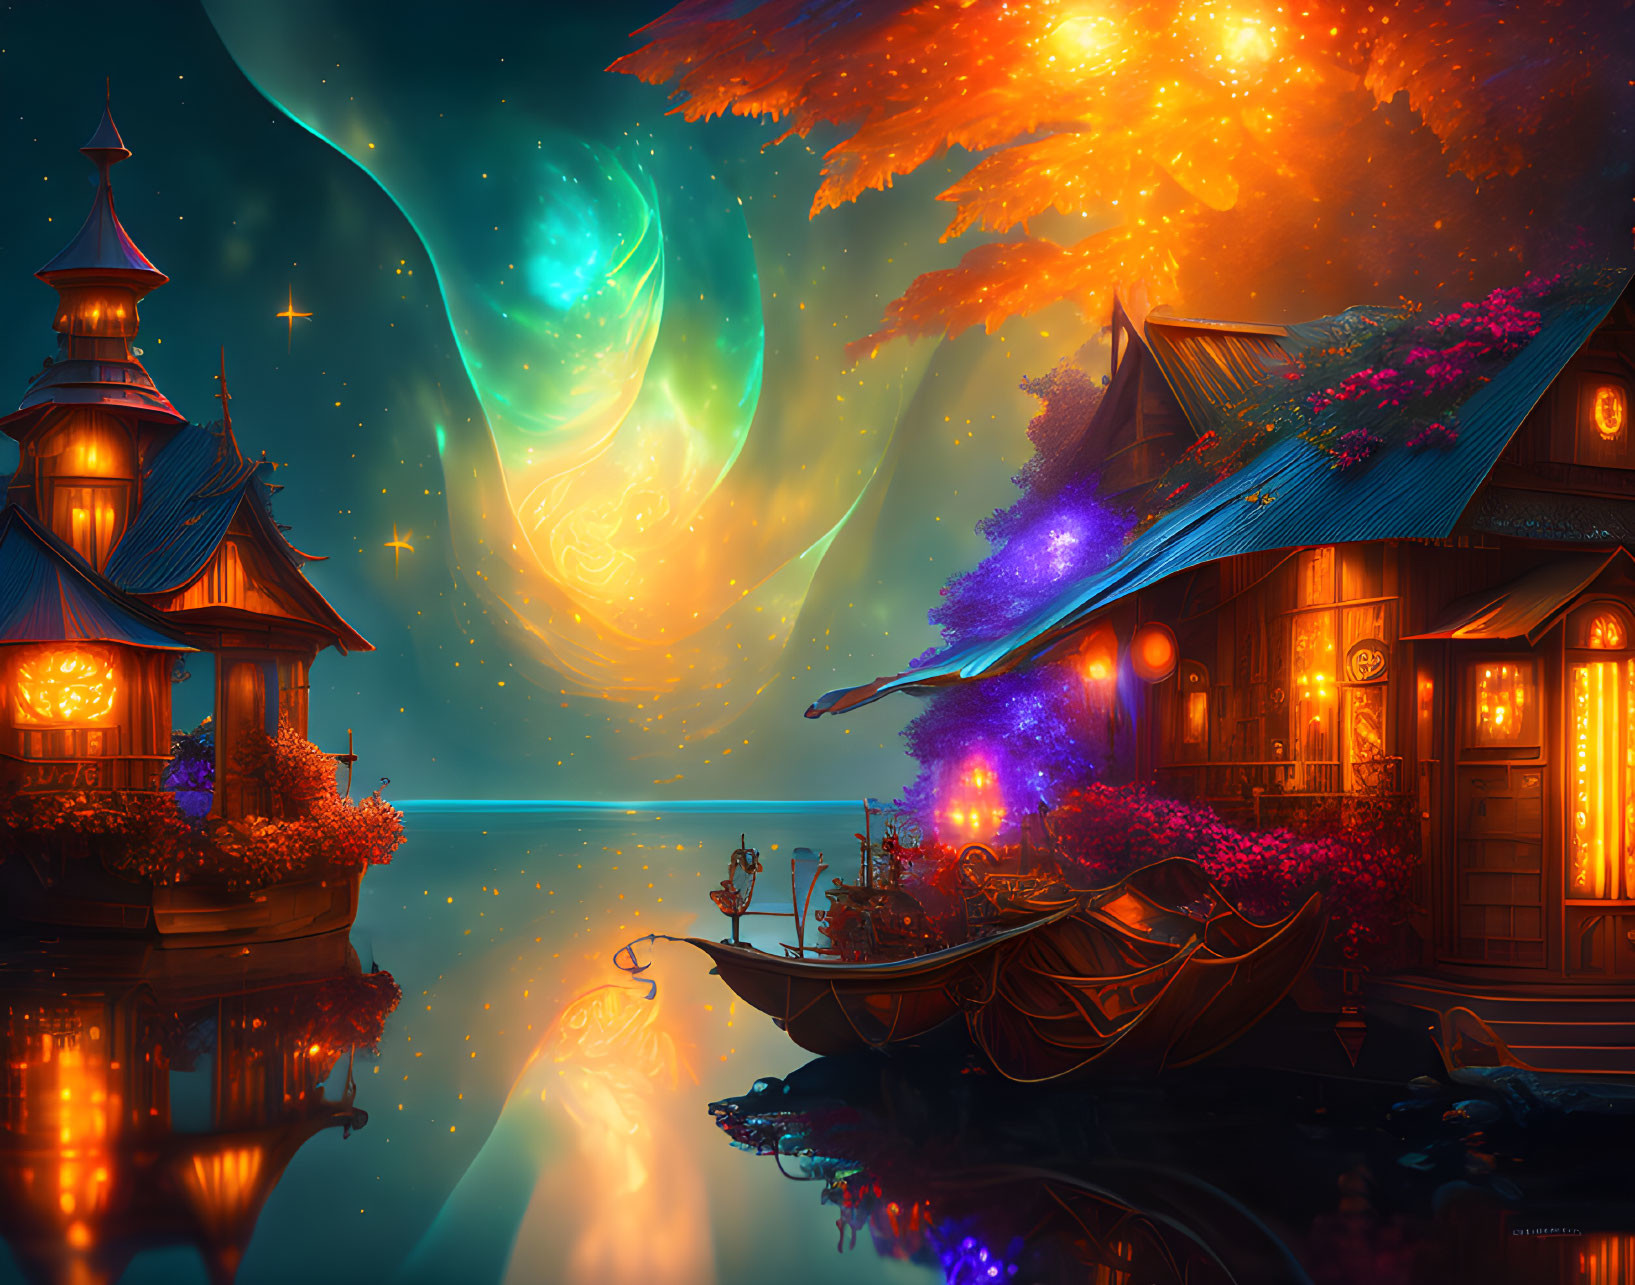 Traditional houses by a still lake under a cosmic sky with auroras and falling leaves